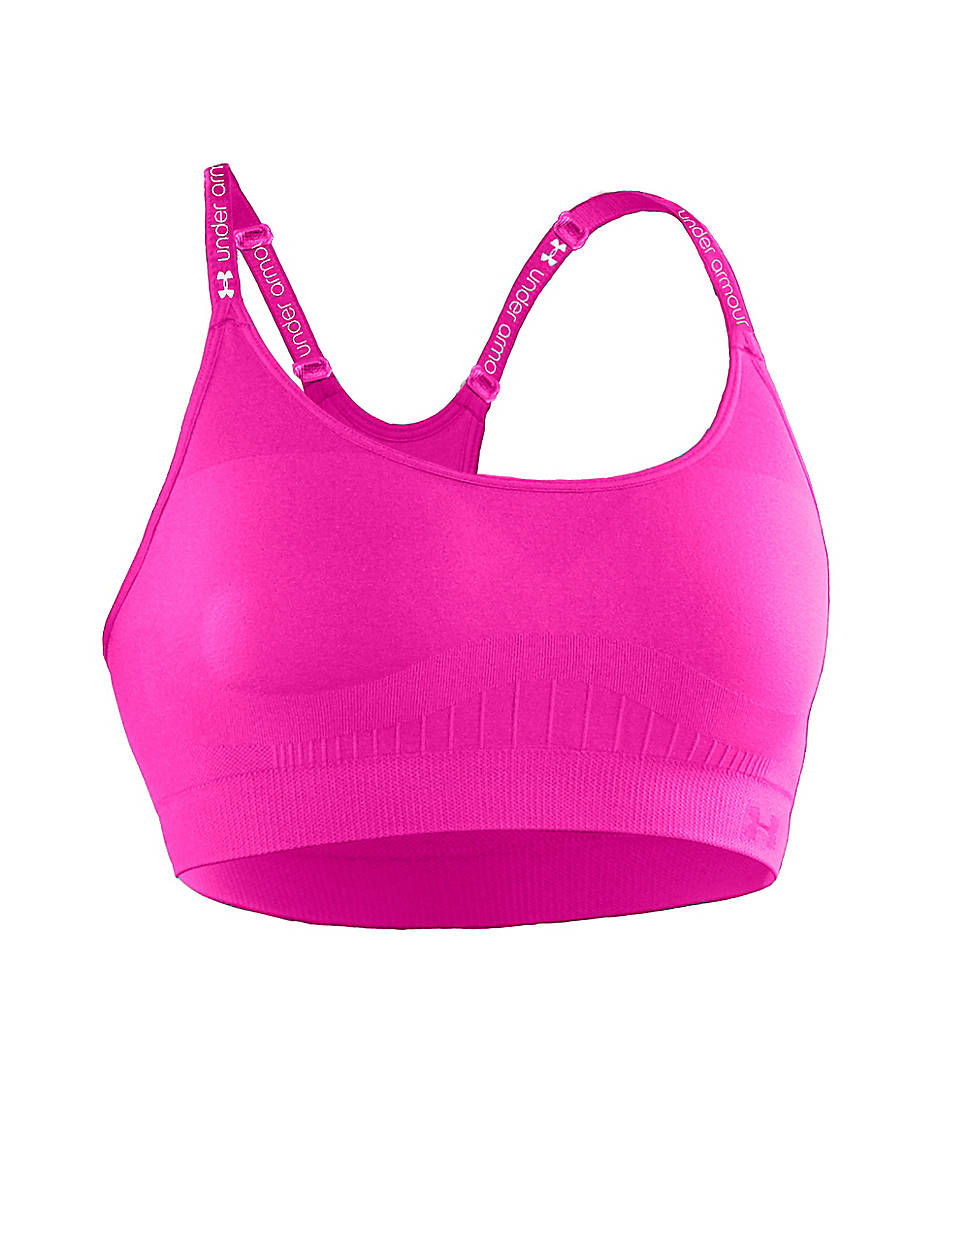 Under Armour Seamless Racerback Sports Bra in Pink (tropic pink) | Lyst